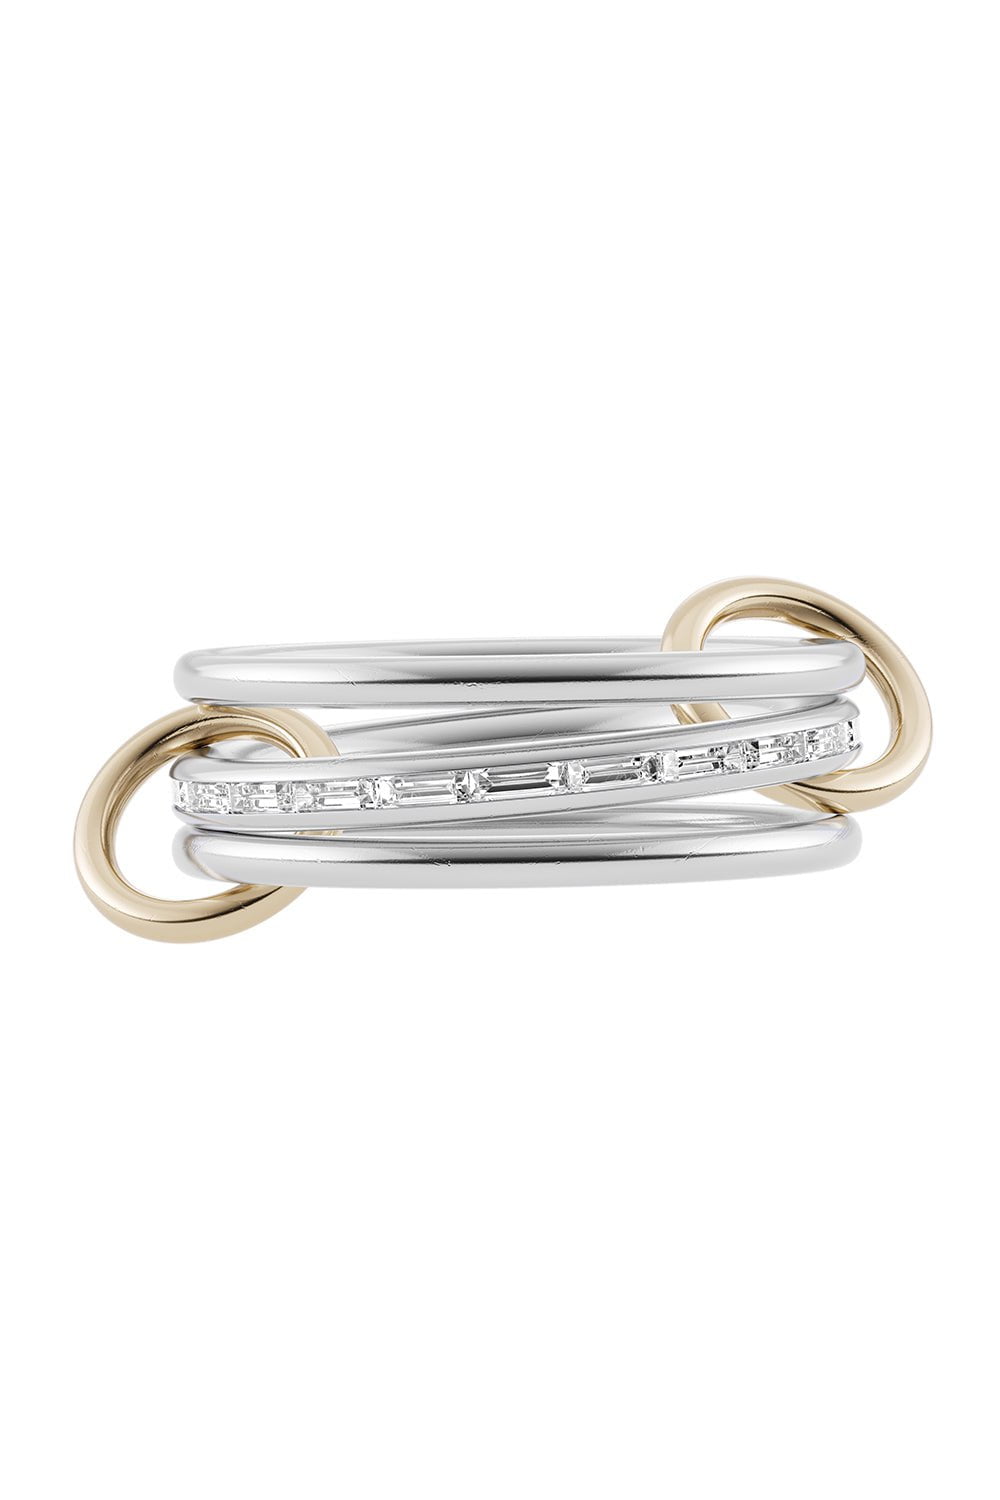 SPINELLI KILCOLLIN-Hume WG Three Linked Ring-WHITE GOLD